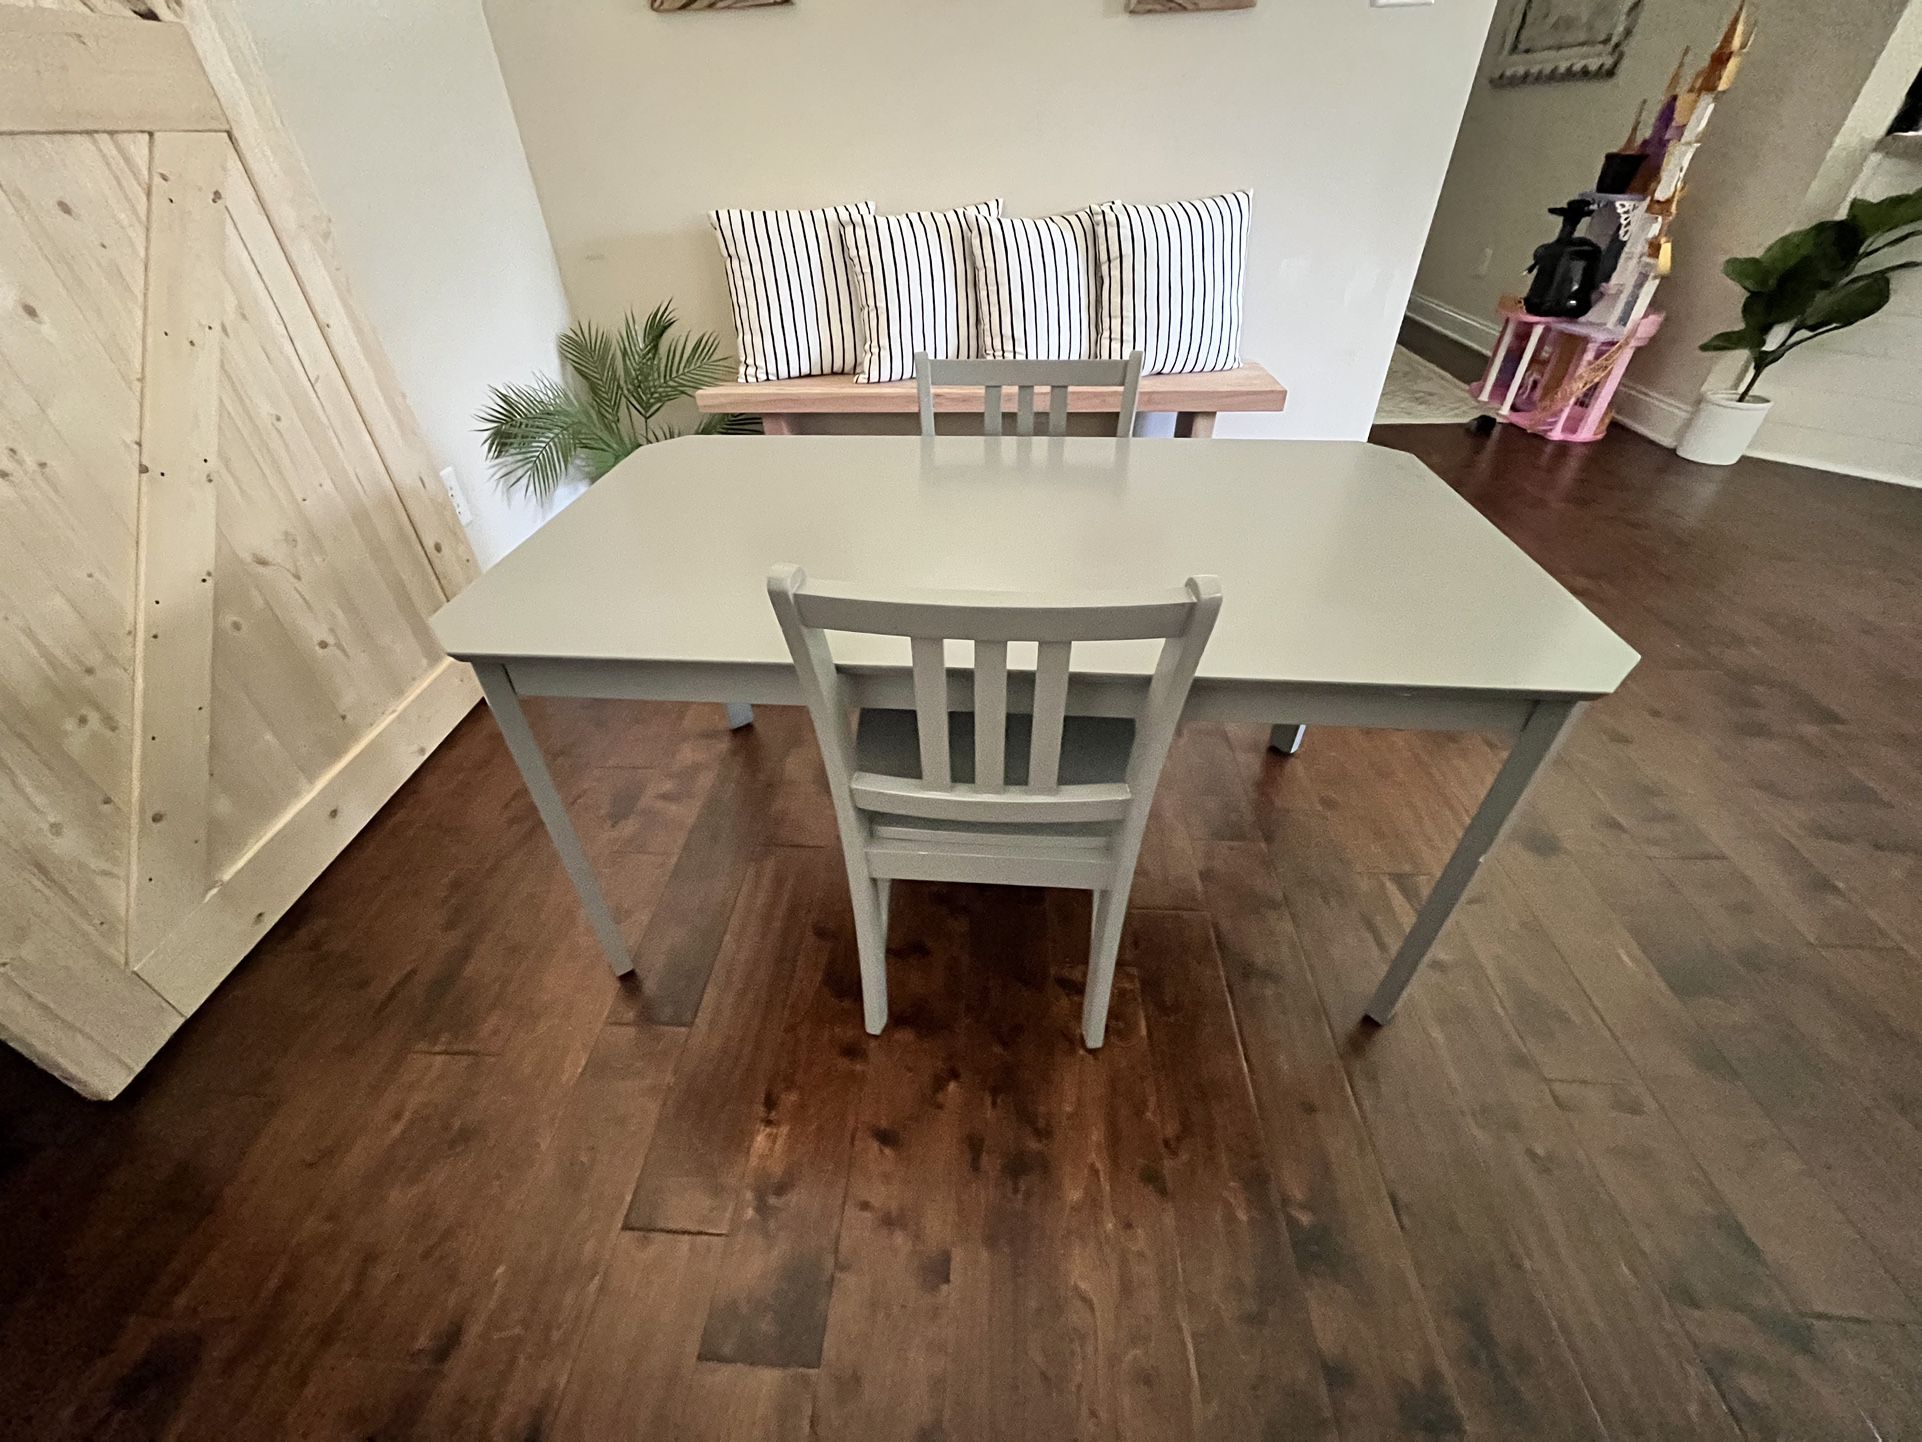 Kids “rooms To Go Table” With 2 Chairs